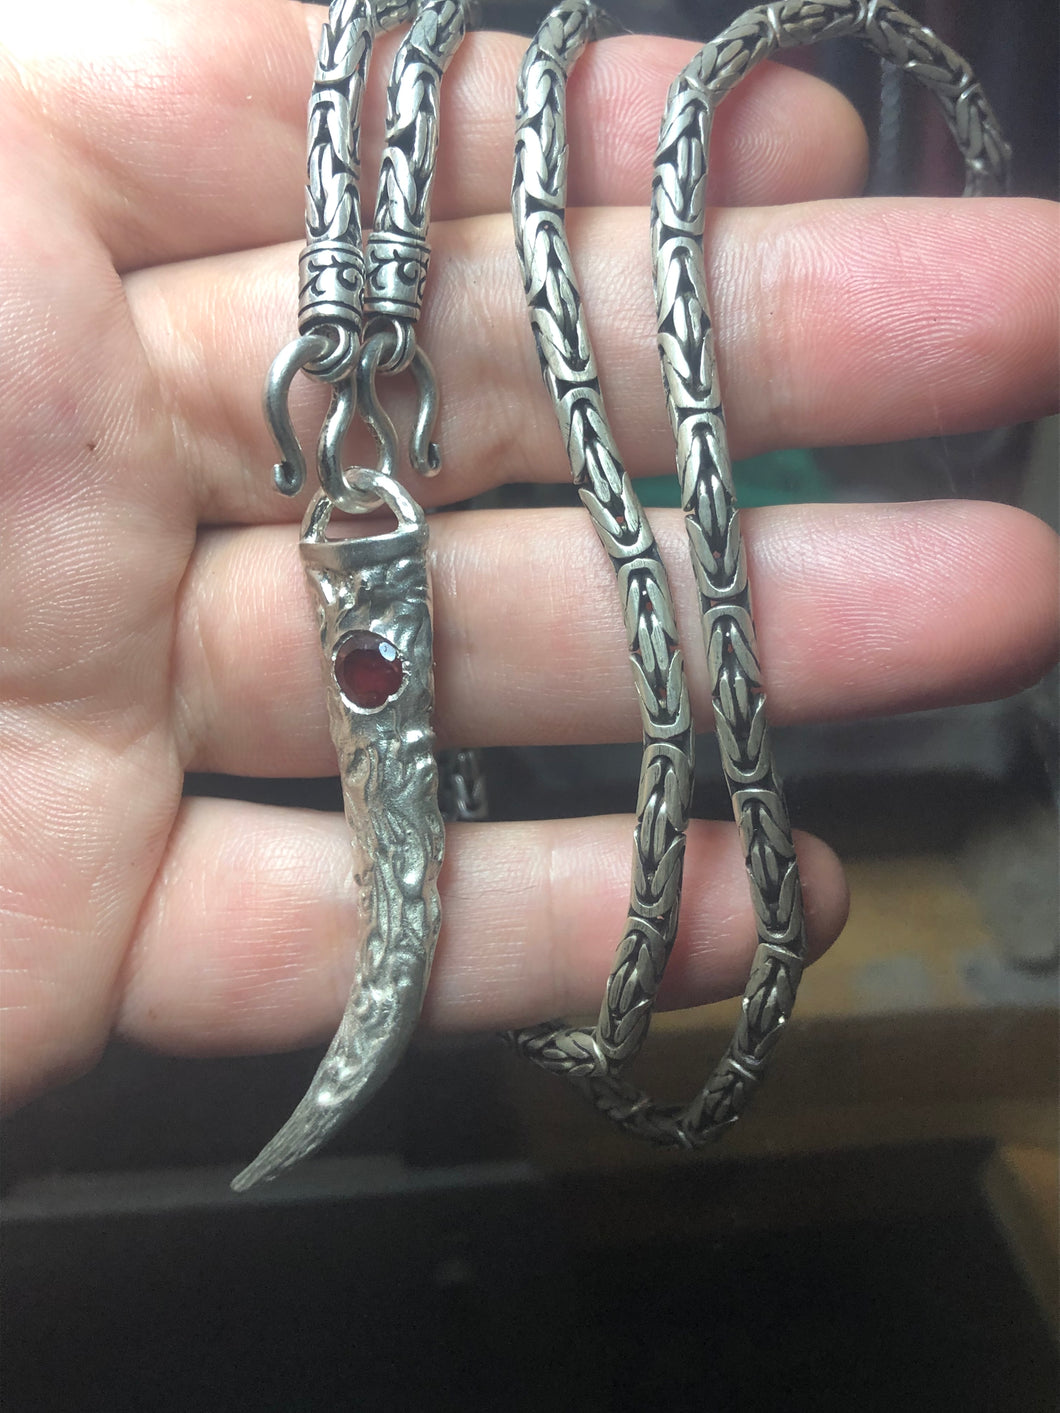 Scrollwork wolf tooth pendant with cast in place garnet setting on Thai Byzantine chain.